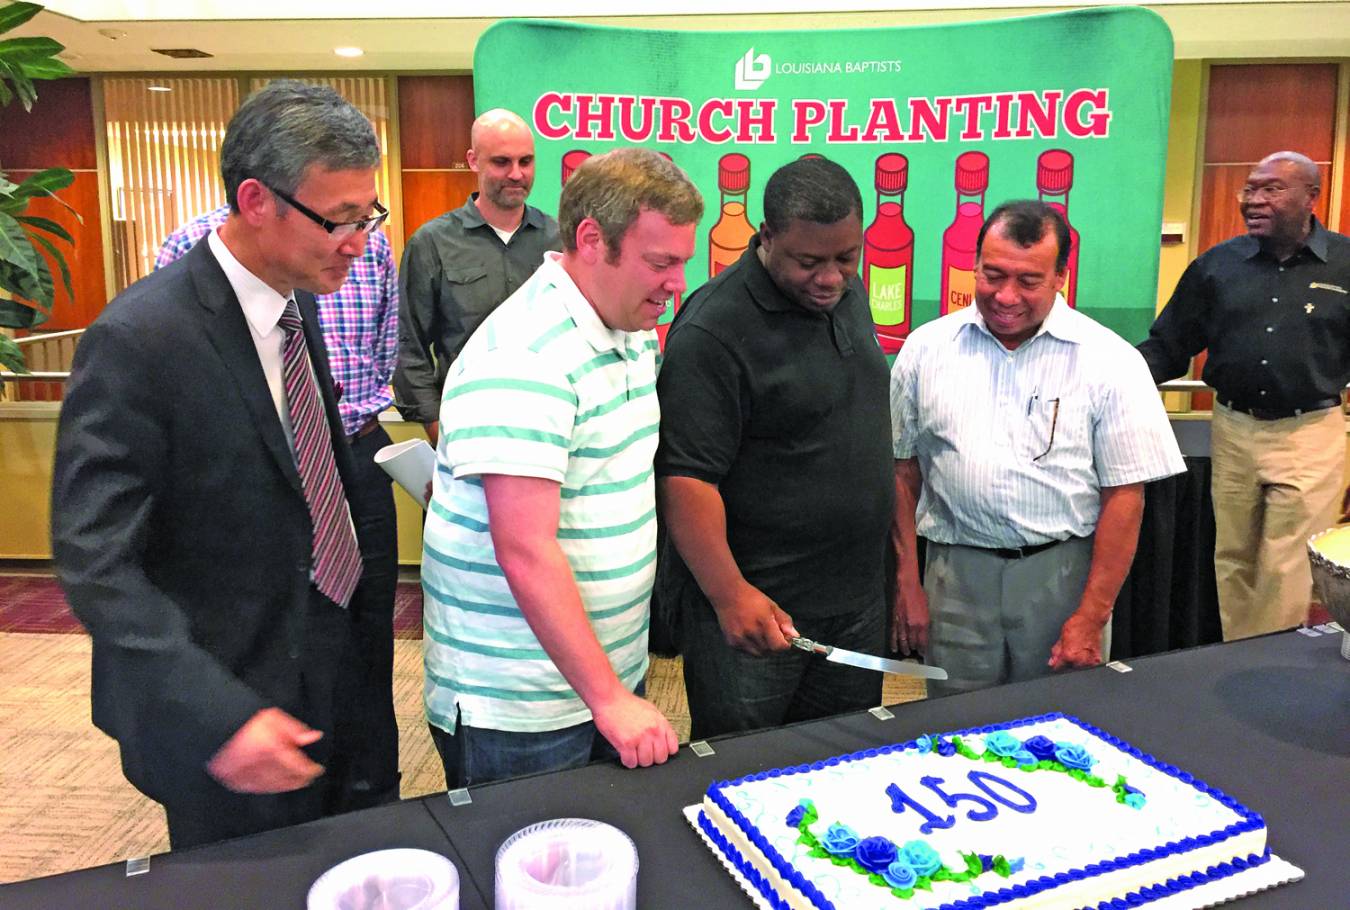 David Lee, pastor of Bansuk Korean Baptist Church in Bossier City; Jacob Crawford, pastor of Life Point Church in Mansura; James Riley, pastor of House of Prayer in Baton Rouge; and Cleto Perez, pastor of Nueva Vida Baptist Church in Athens, prepare to cut a cake commemorating the 150th Louisiana Baptist church planted since 2010.